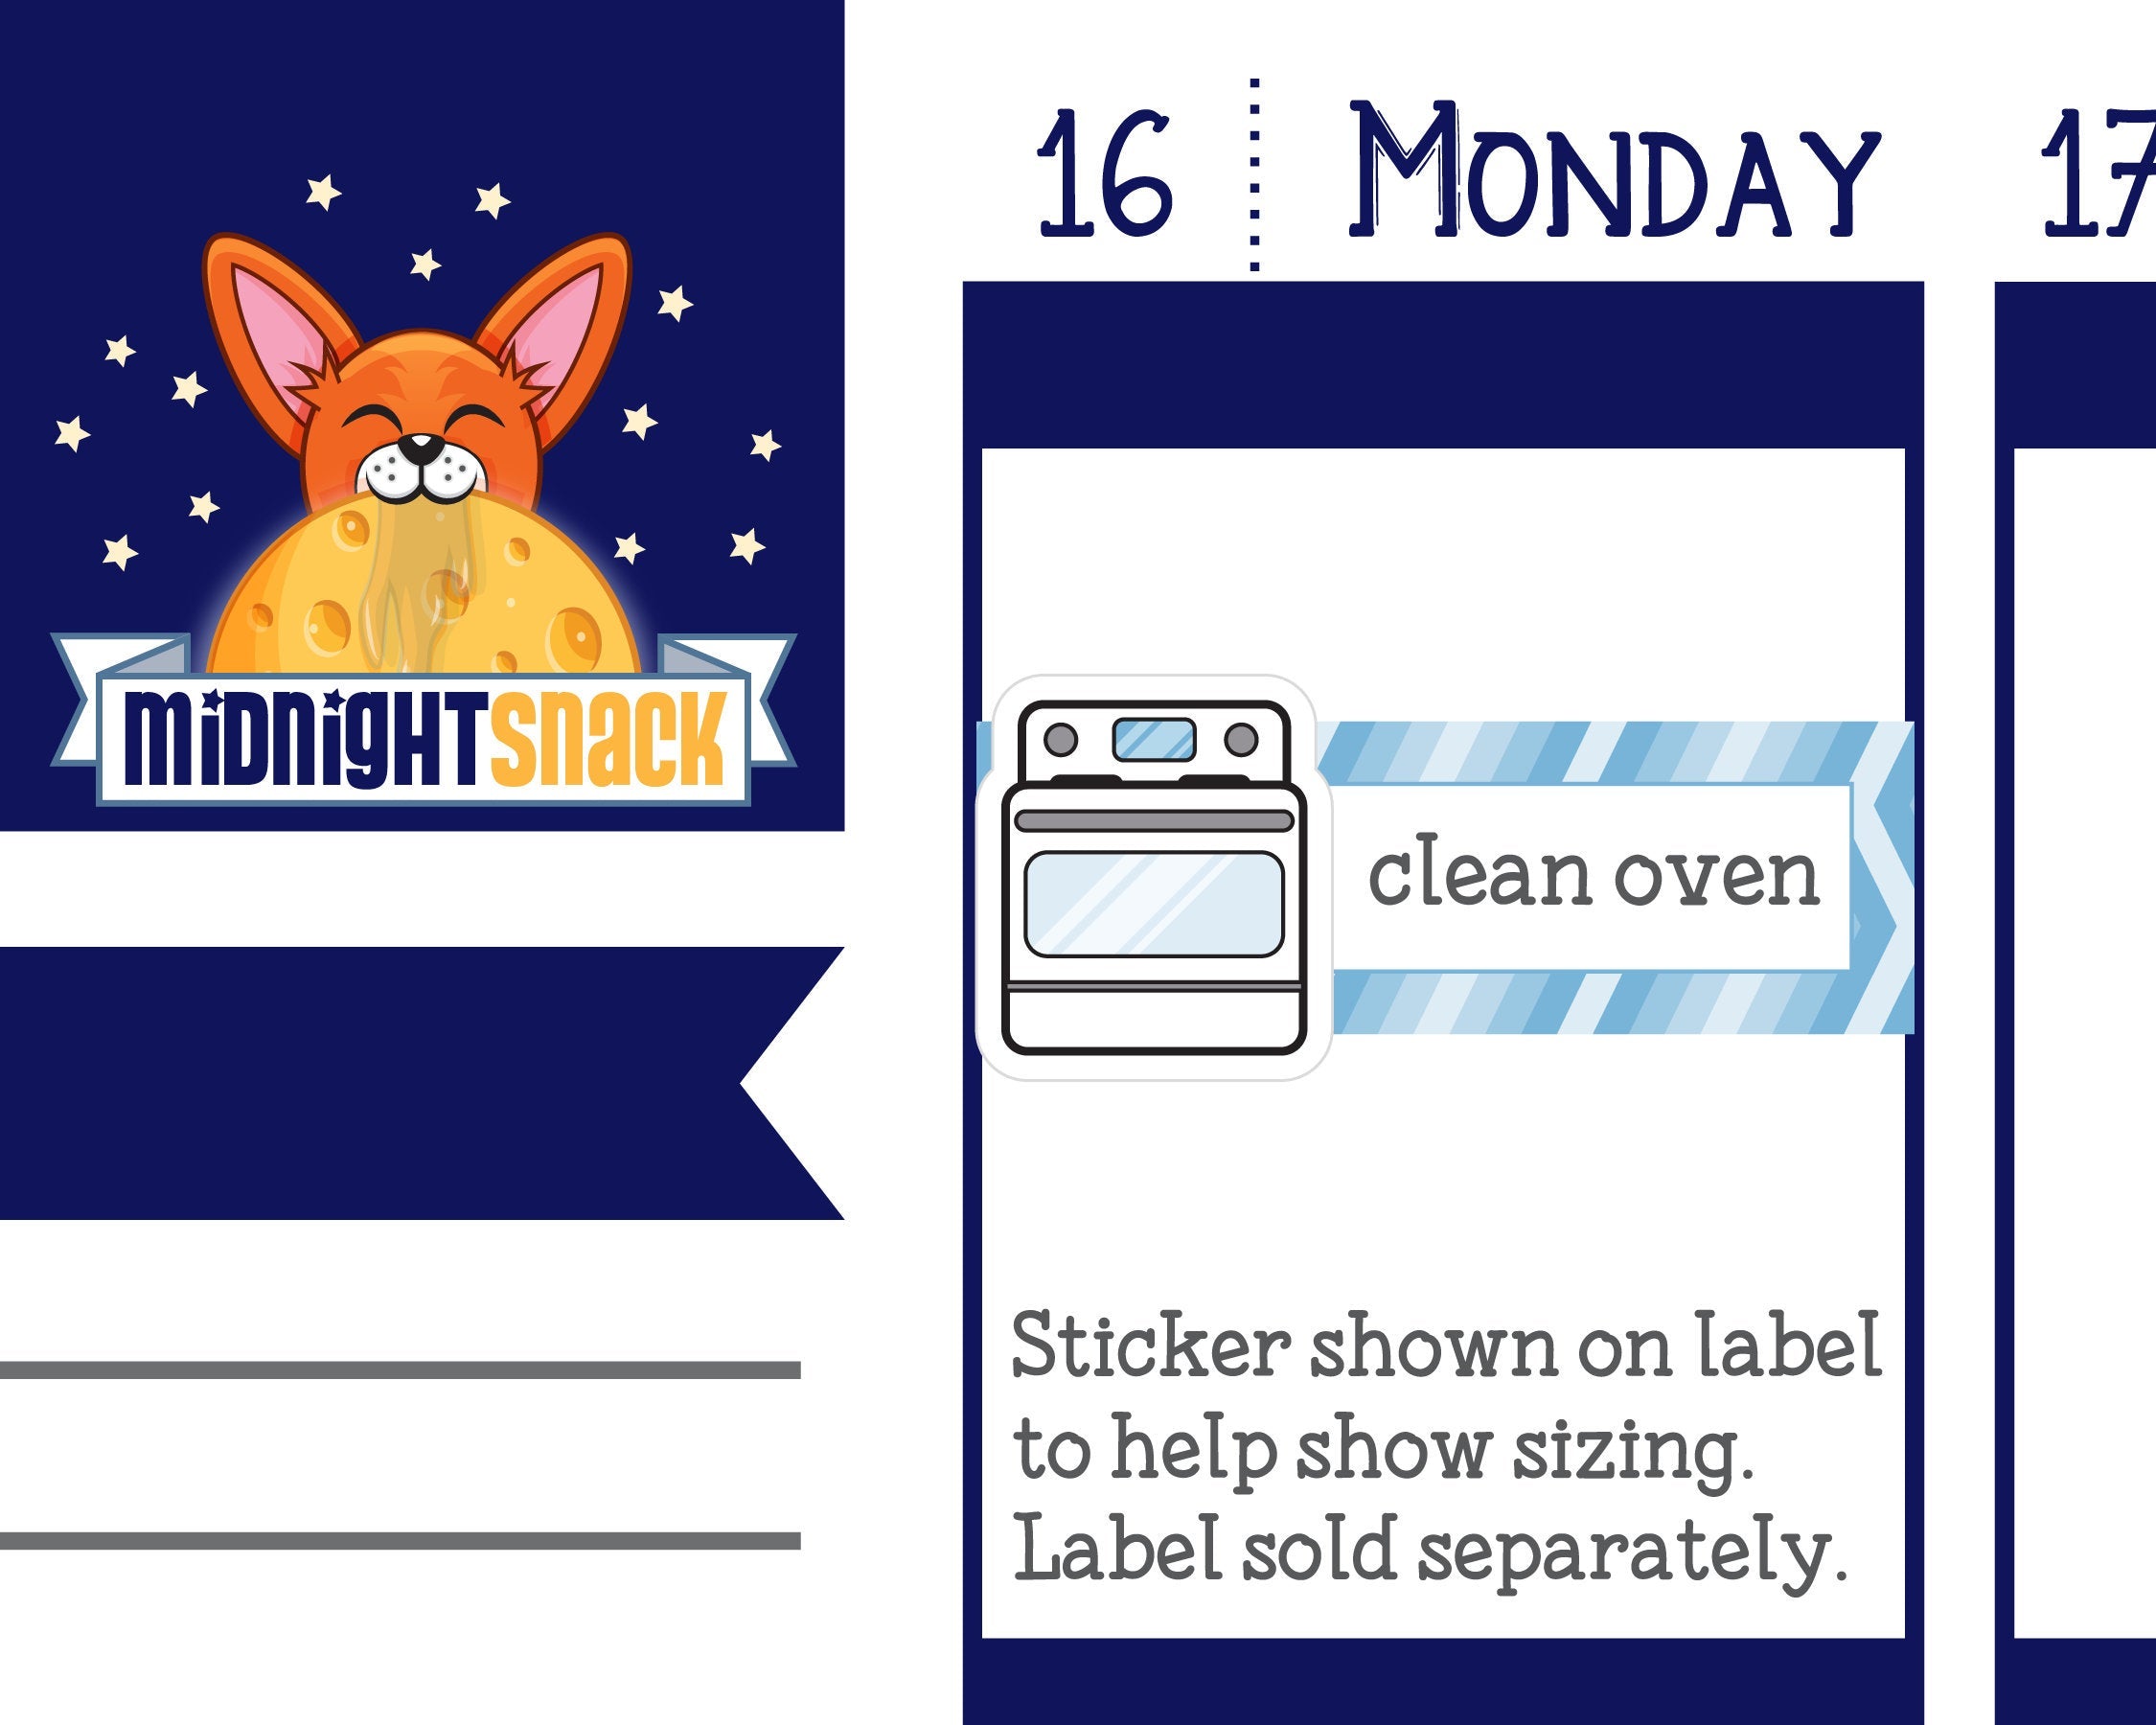 Clean the Oven Icon: Household Chores Planner Stickers Midnight Snack Planner